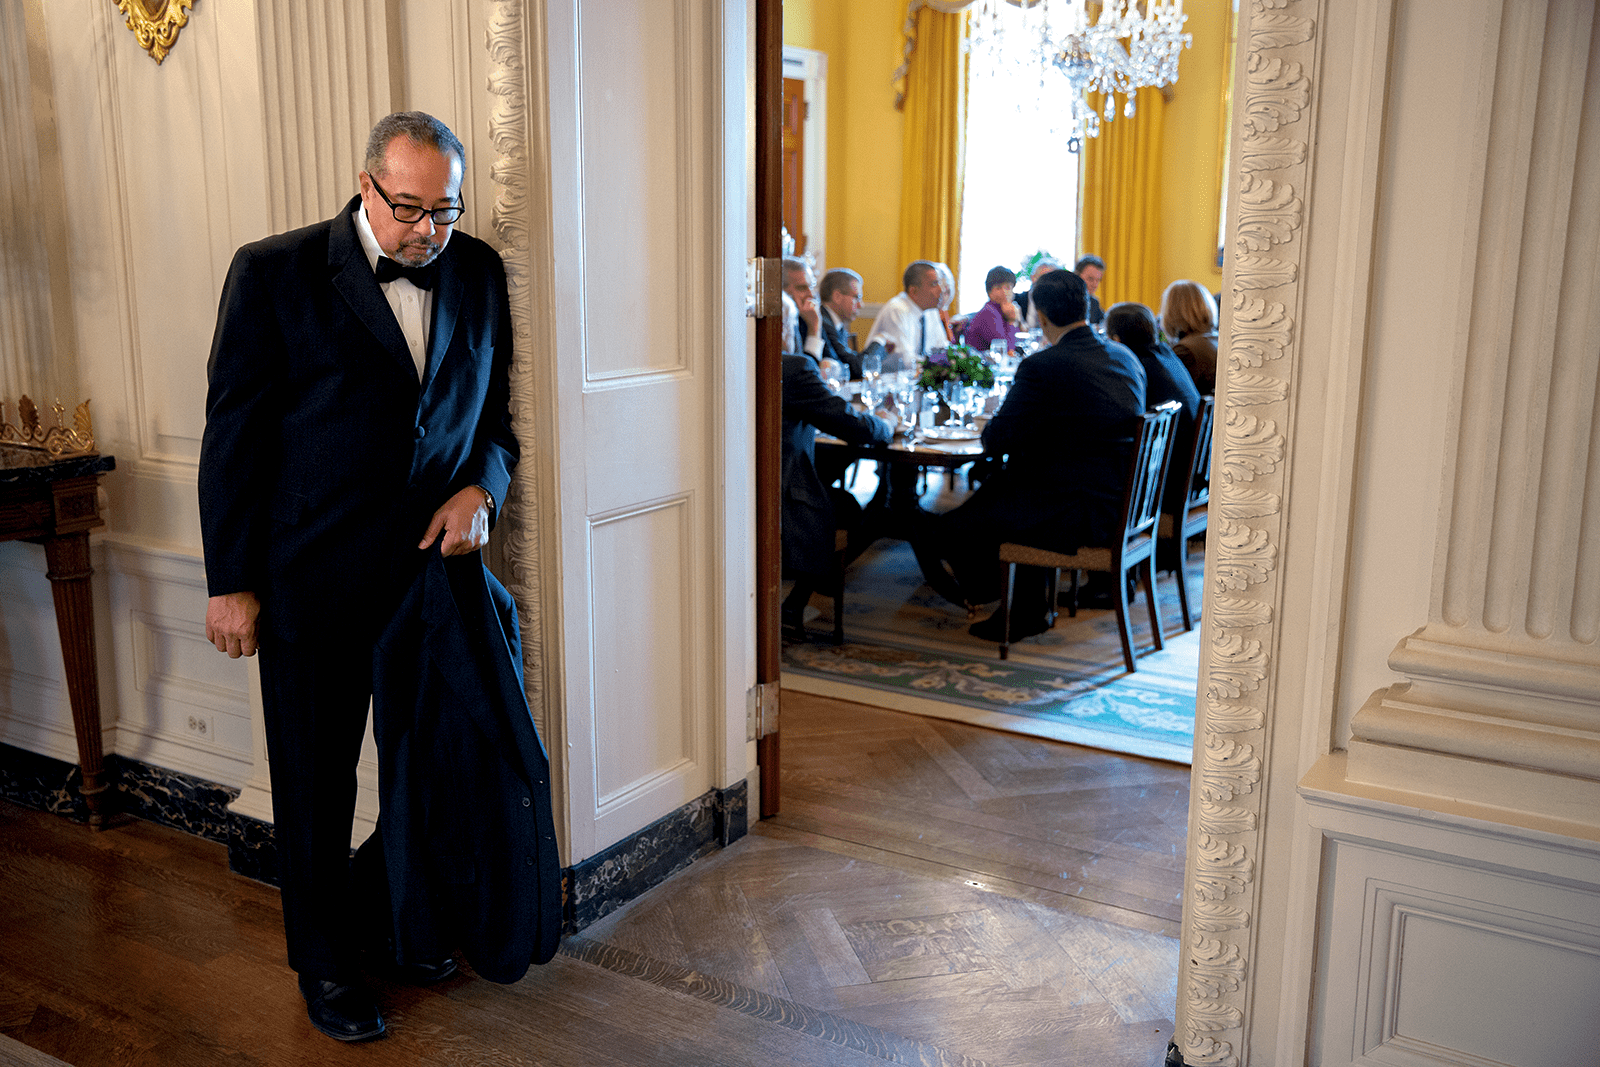 White House butler Von Everett holding President Obama’s suit coat during a luncheon with TV anchors. Copyright © 2022 by Pete Souza. (Courtesy of Pete Souza)